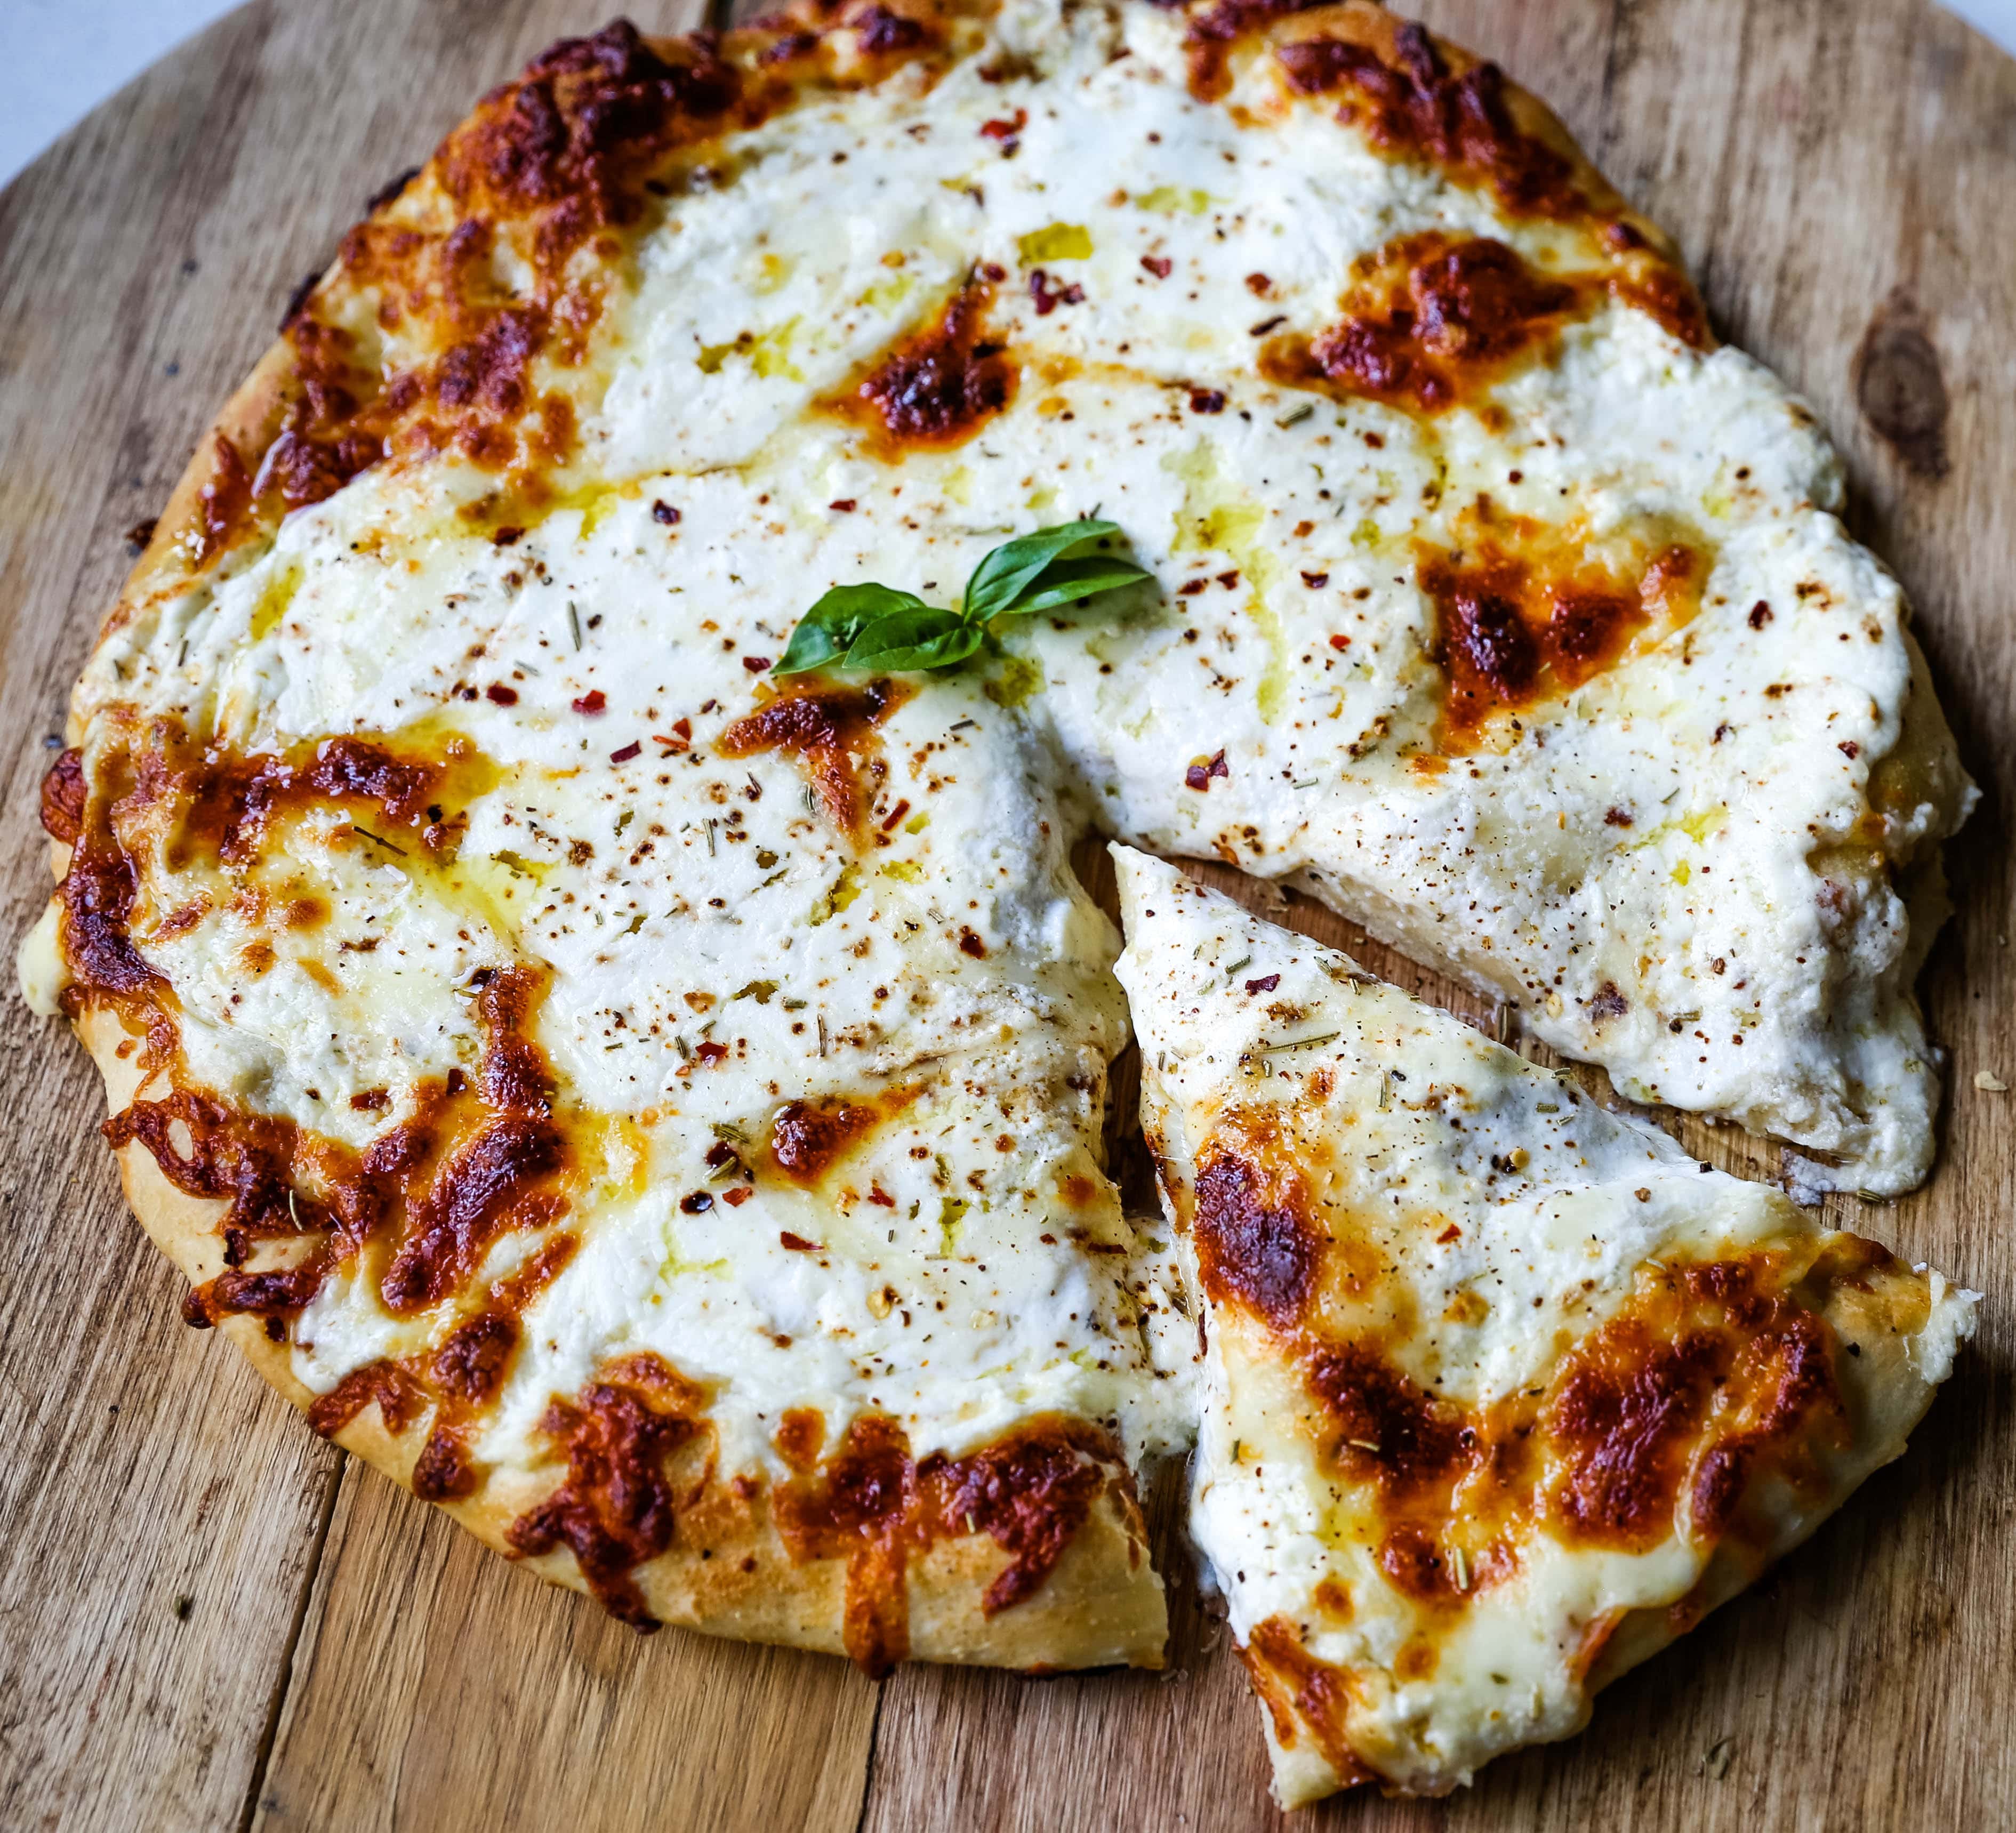 The Best 3-Cheese White Pizza A New-York Style white pizza with drizzled olive oil, mozzarella, parmesan, and ricotta cheese with Italian herbs. www.modernhoney.com #pizzabianca #whitepizza #pizza 